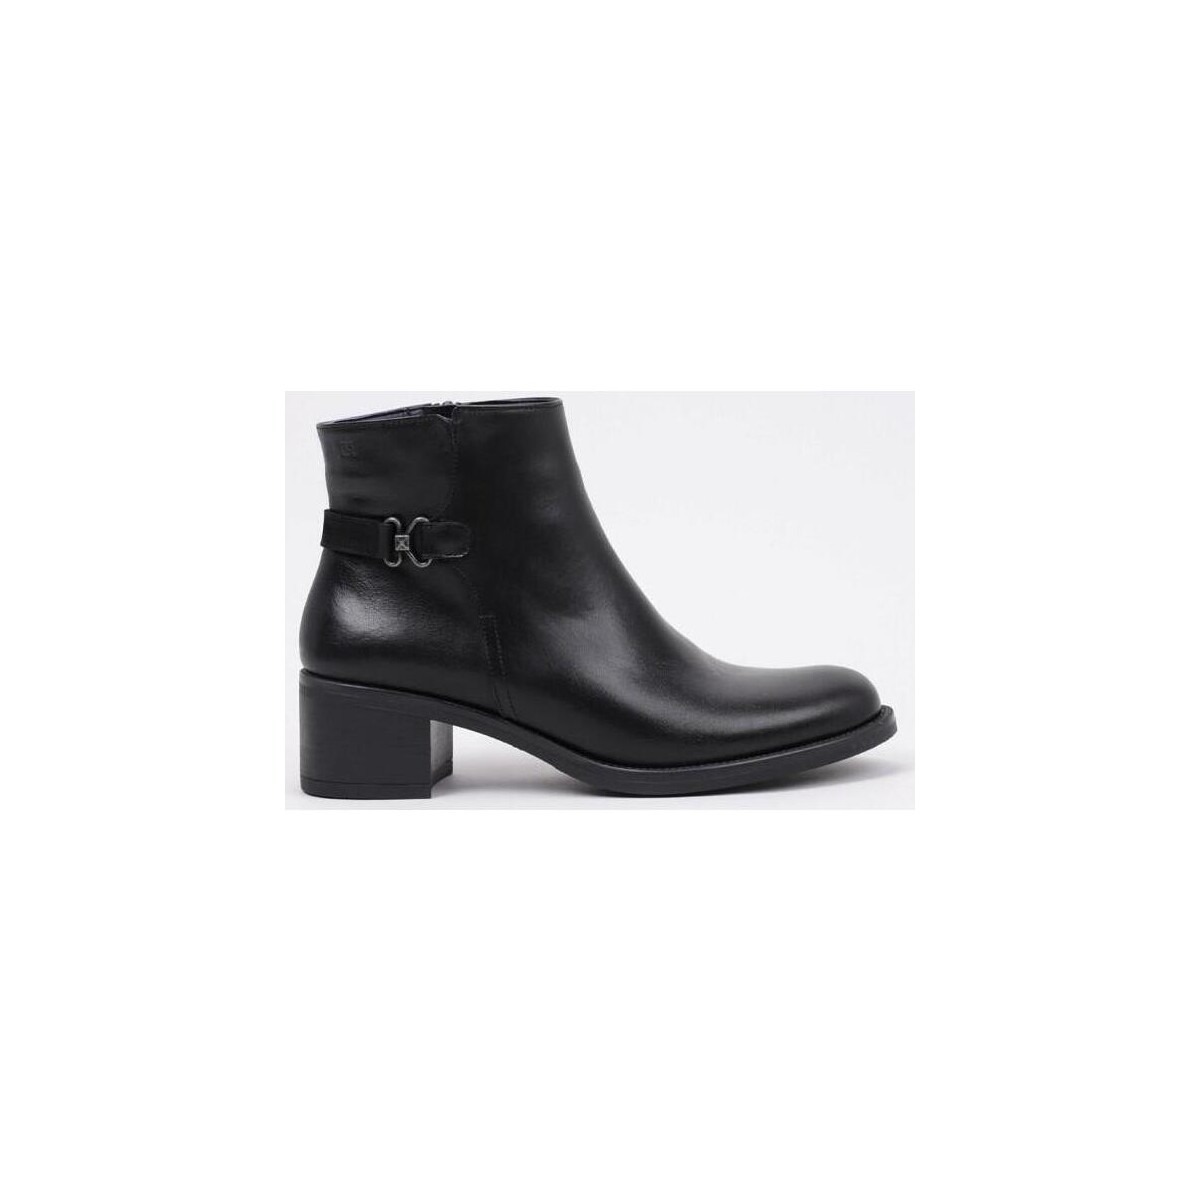 Dorking - Women's Ankle Boots in Black at Spartoo GOOFASH